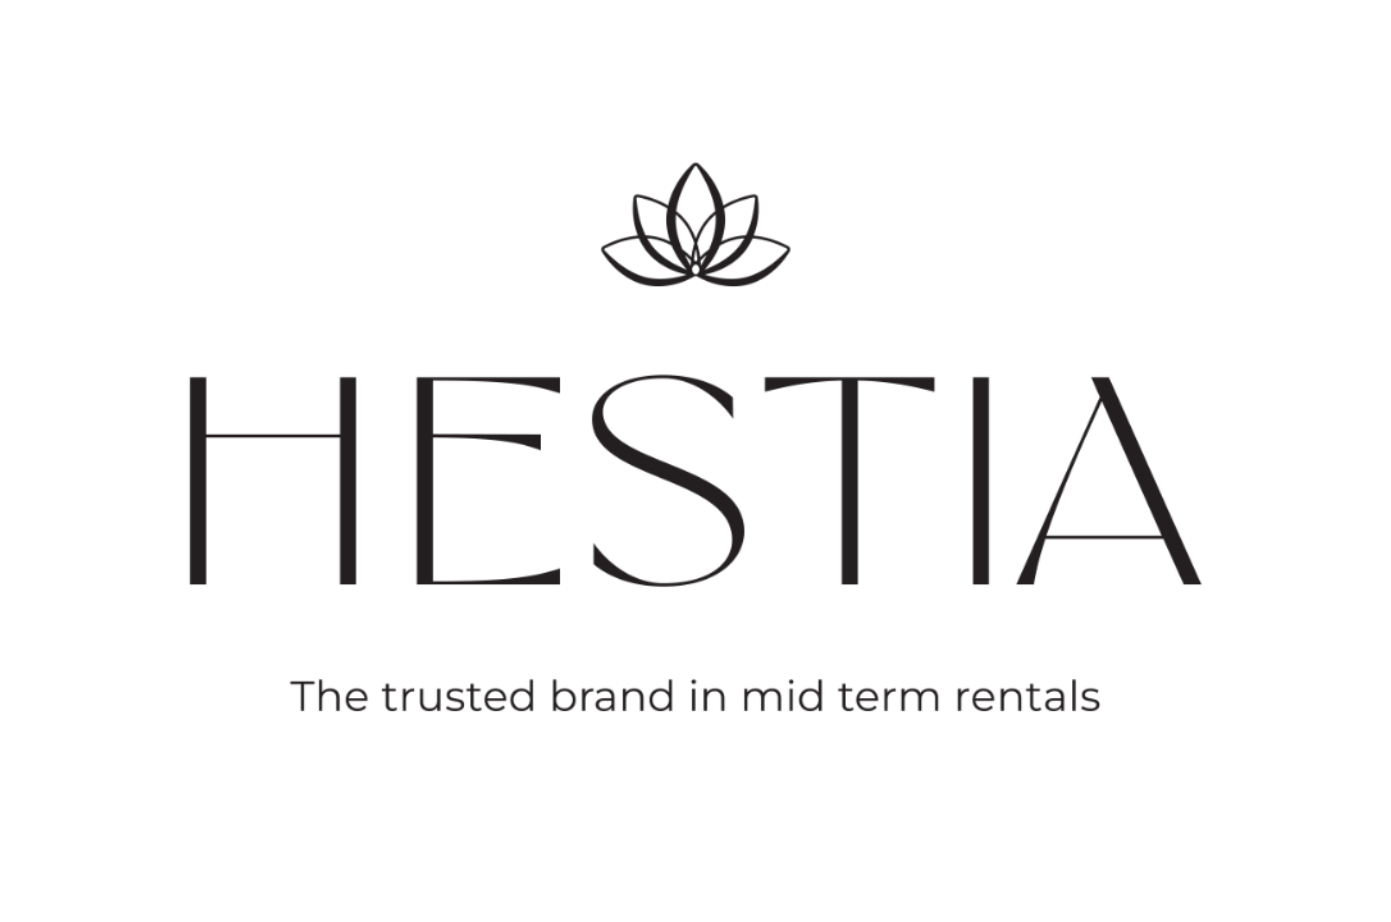 Hestia by Corporate Rentals USA: The New Standard in Single Family Housing and Extended Stays